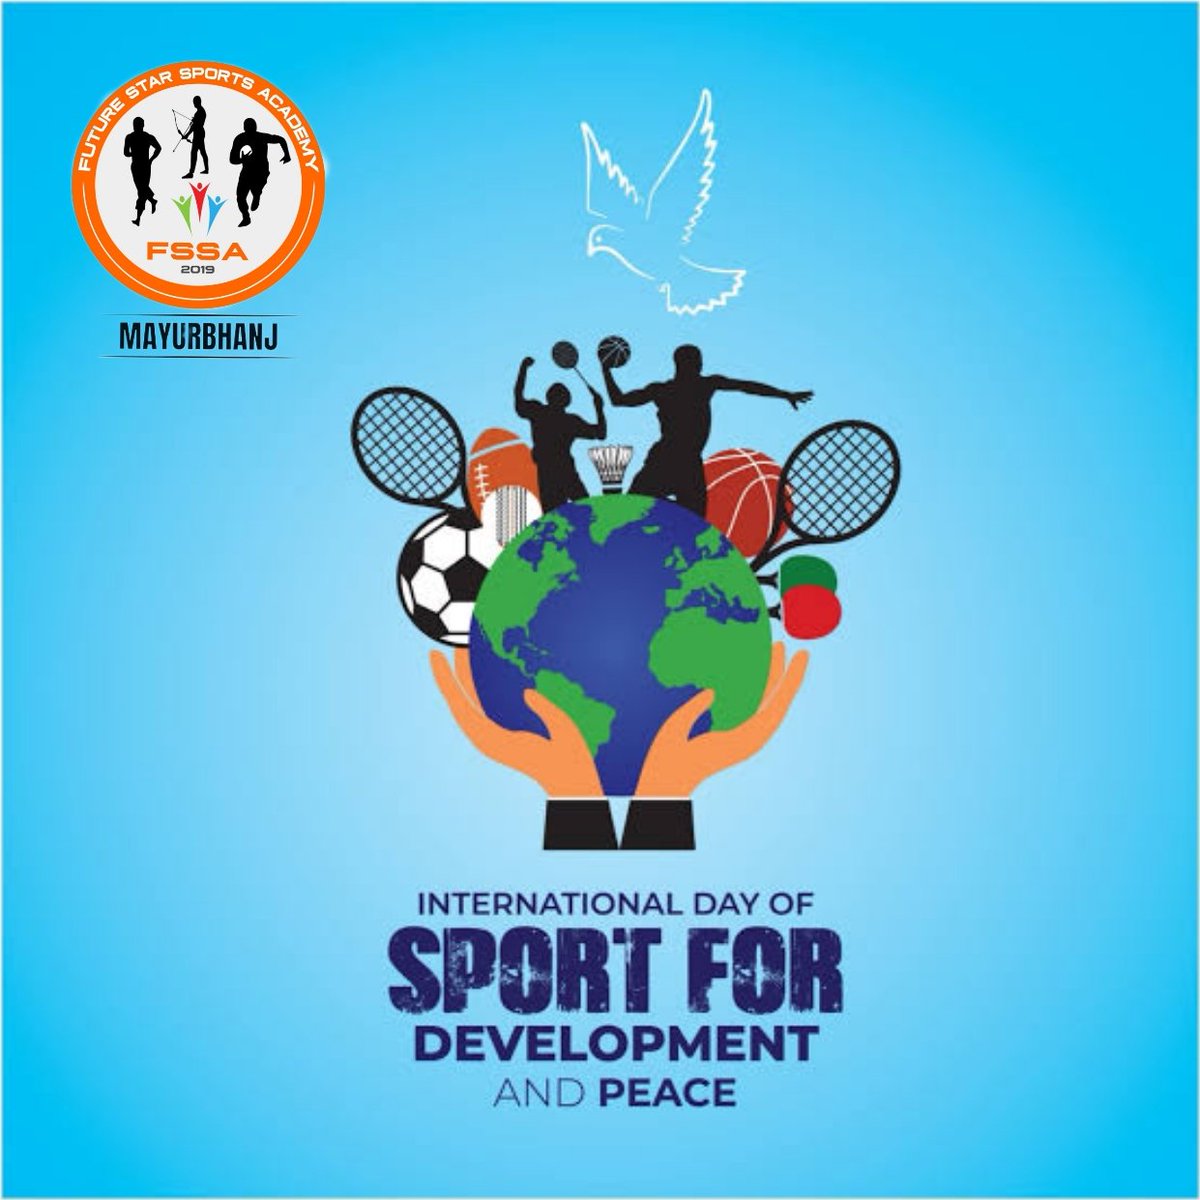 Sports creates a bond between contemporaries that lasts a lifetime. It also gives your life structure, discipline and a genuine, sincere, pure fulfillment that few other areas of endeavor provide.”
#We4Sports